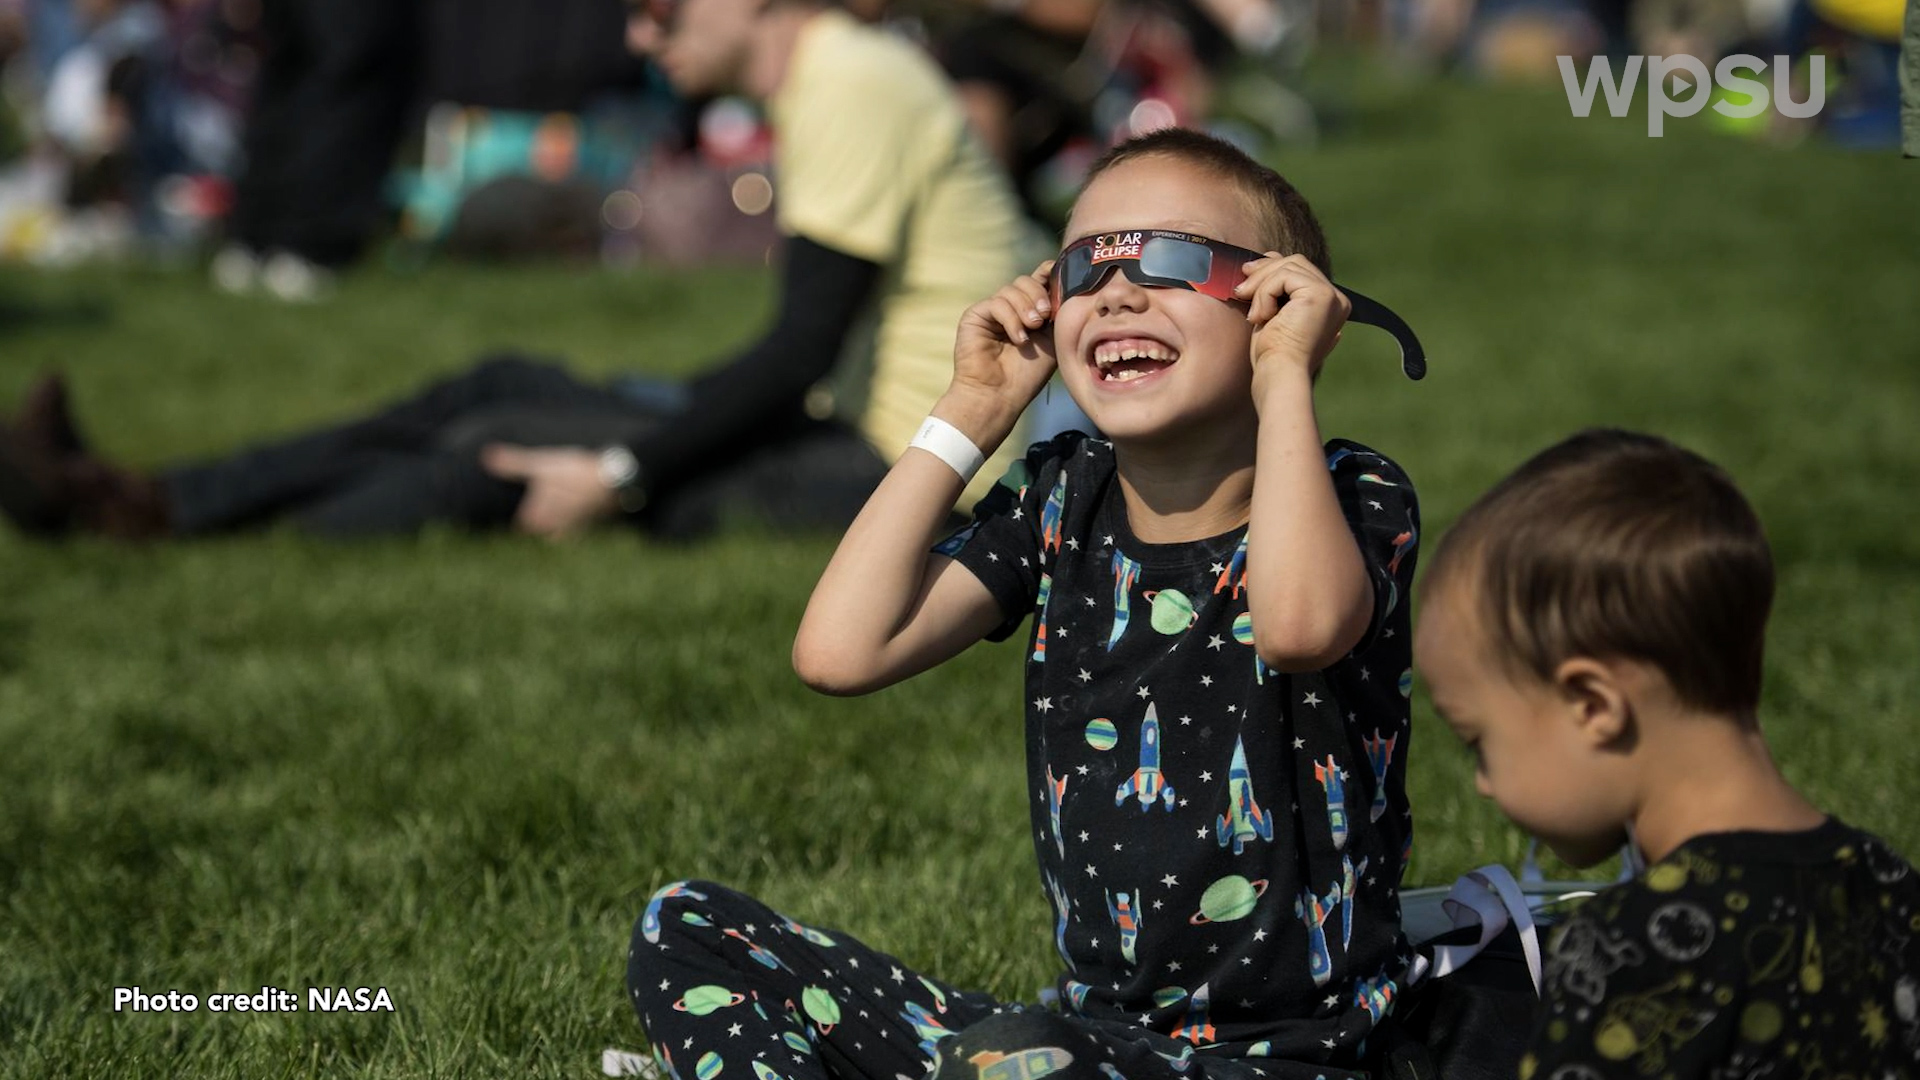 A child watching a solar eclipse while wearing safety glasses.